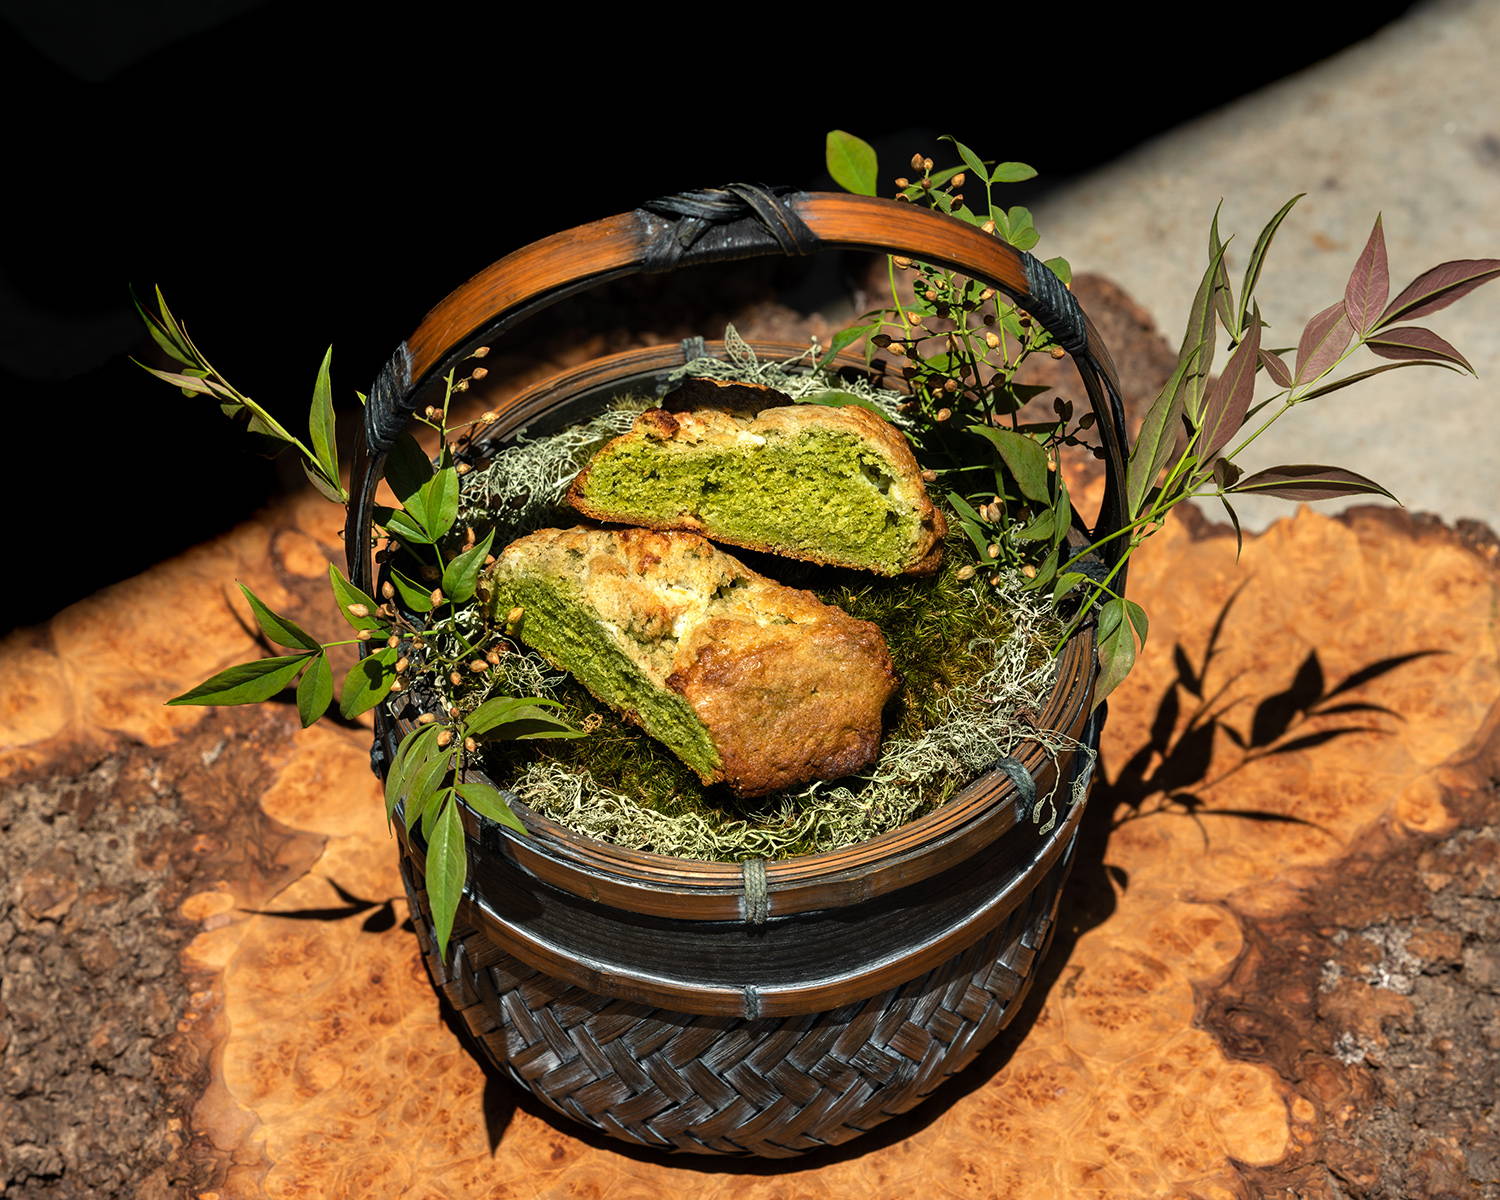 A halved matcha scone, bright green on the inside, sits inside a woven basket.